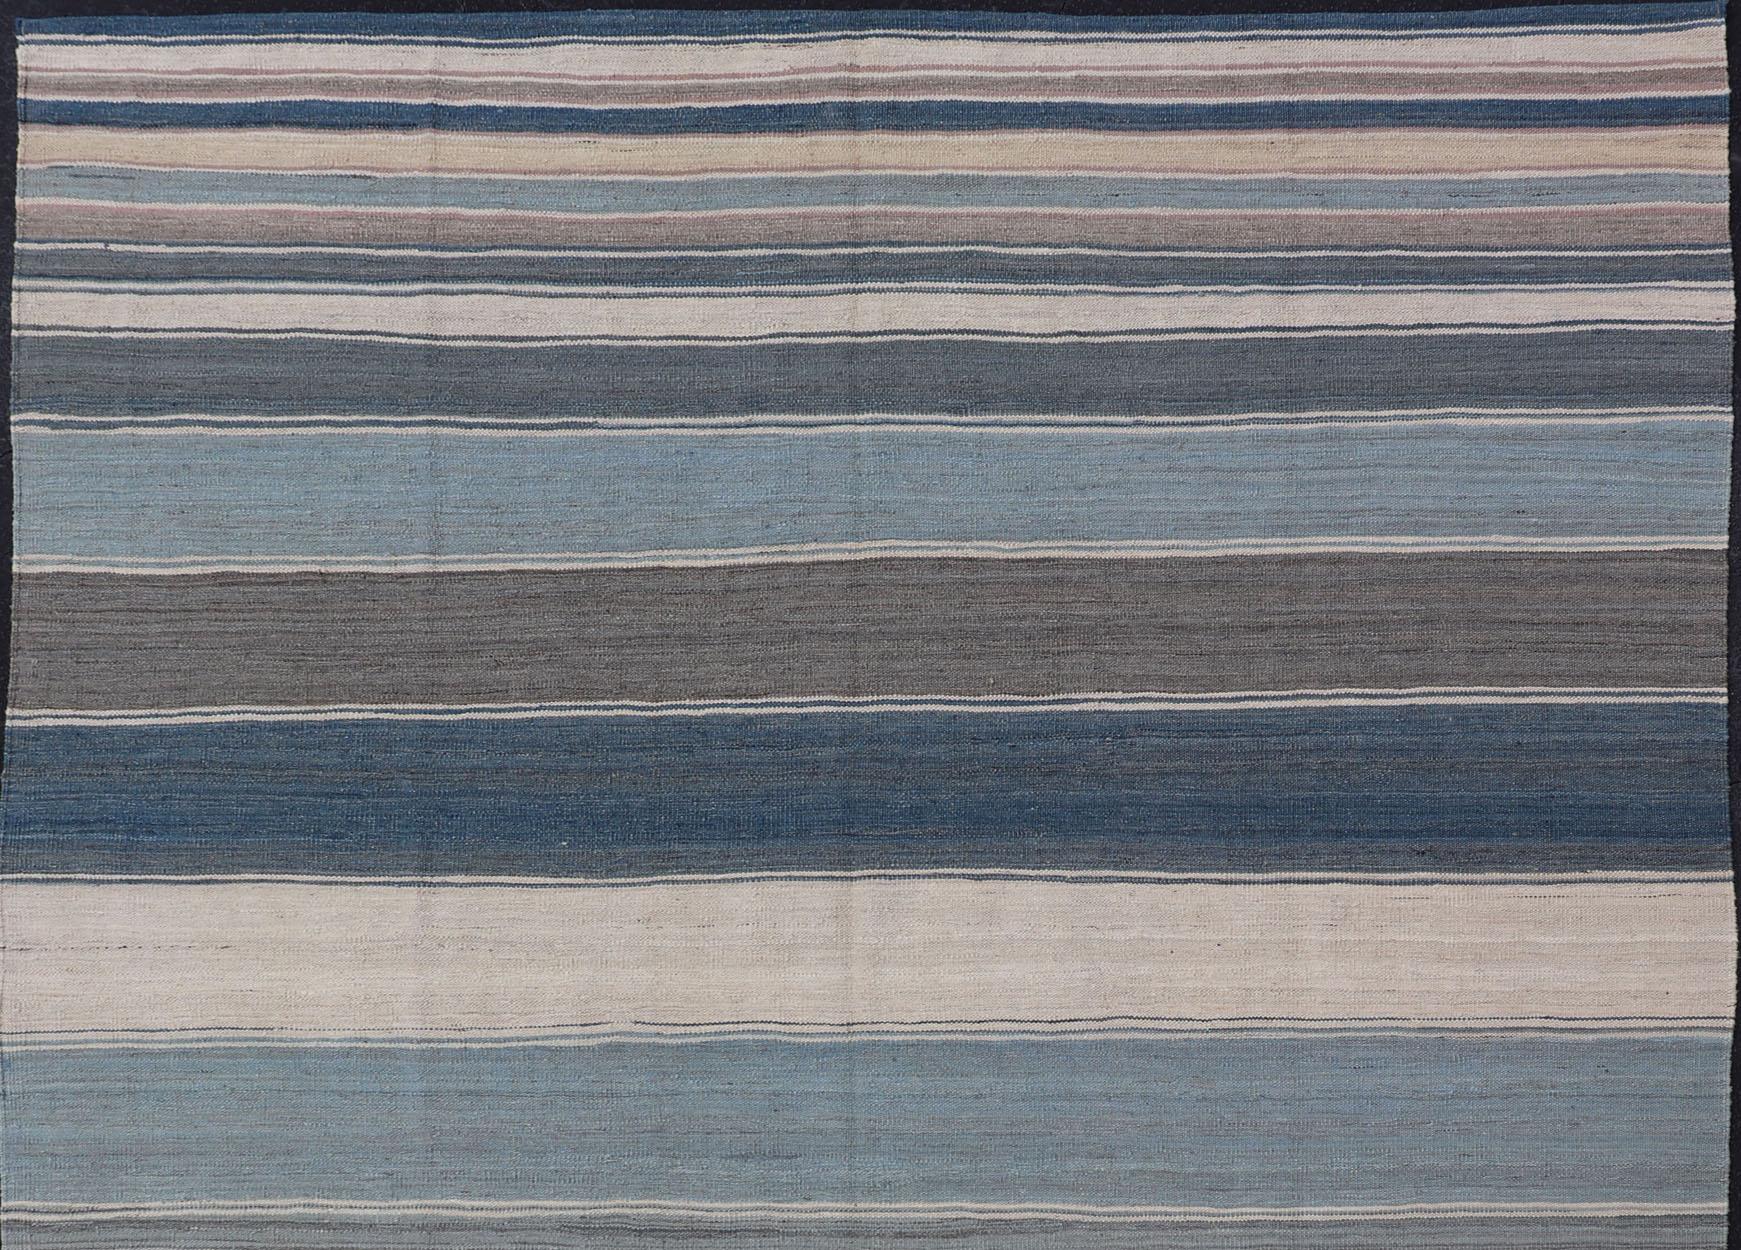 Flat-weave Kilim rug with stripes with modern design in shades of blue, gray, brown and cream, Keivan Woven Arts / rug AFG-156, country of origin / type: Afghanistan / Kilim, Stripe Kilim, Stripe design 

This beautiful piece features a Classic